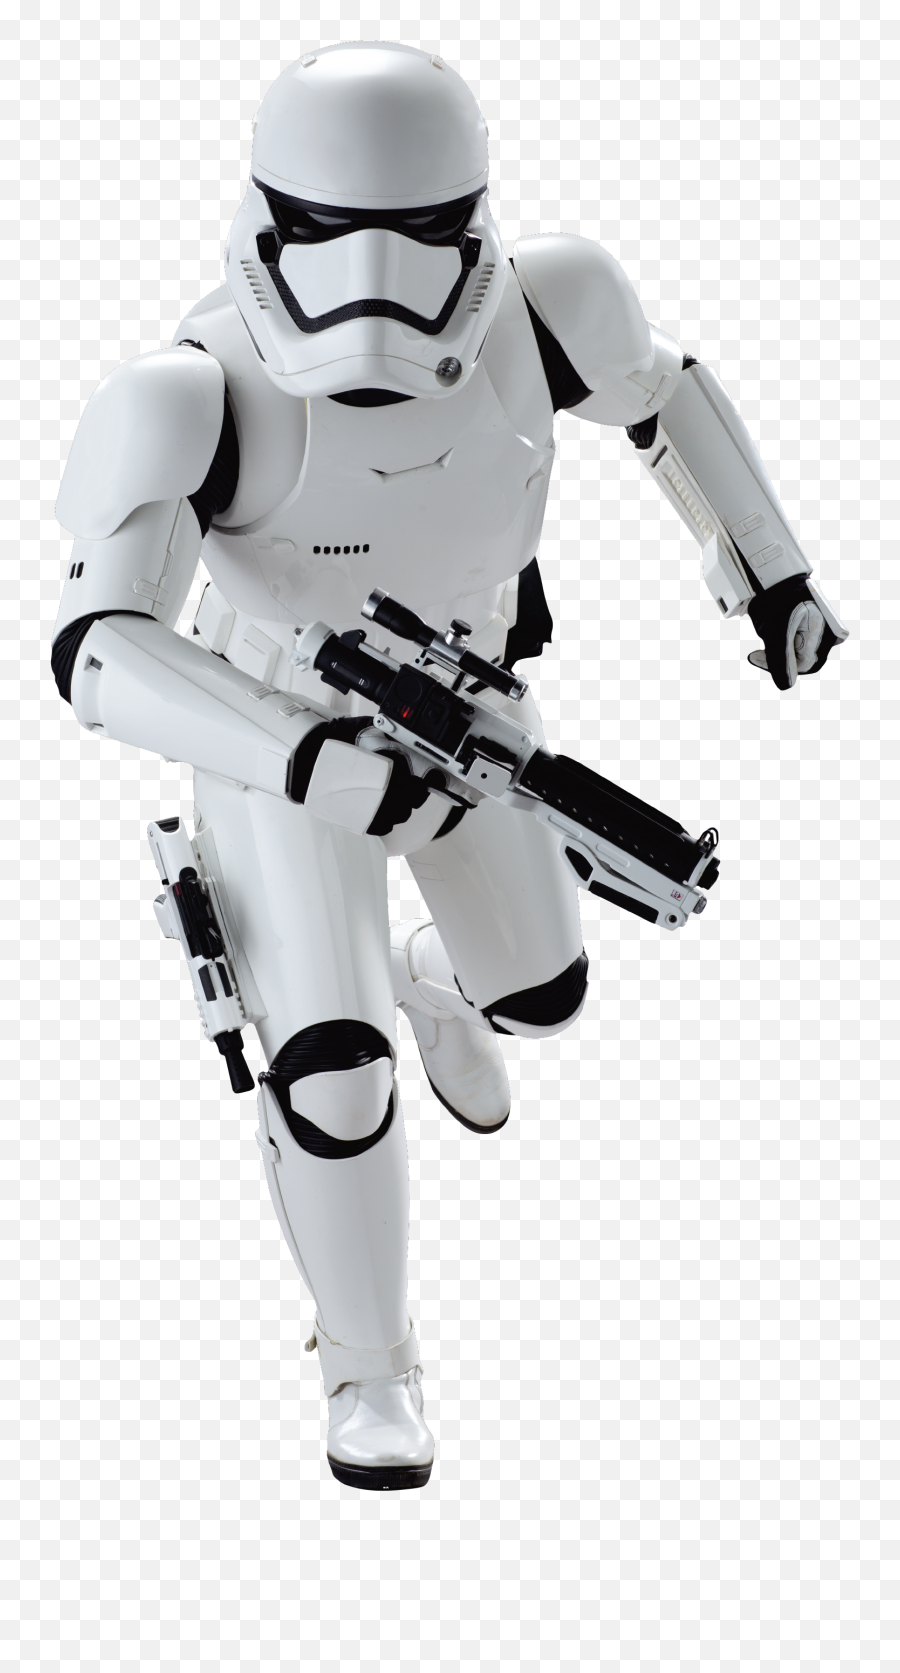 Stormtrooper Star Wars Png Picture - Star Wars Stormtrooper Png,Star Wars Png